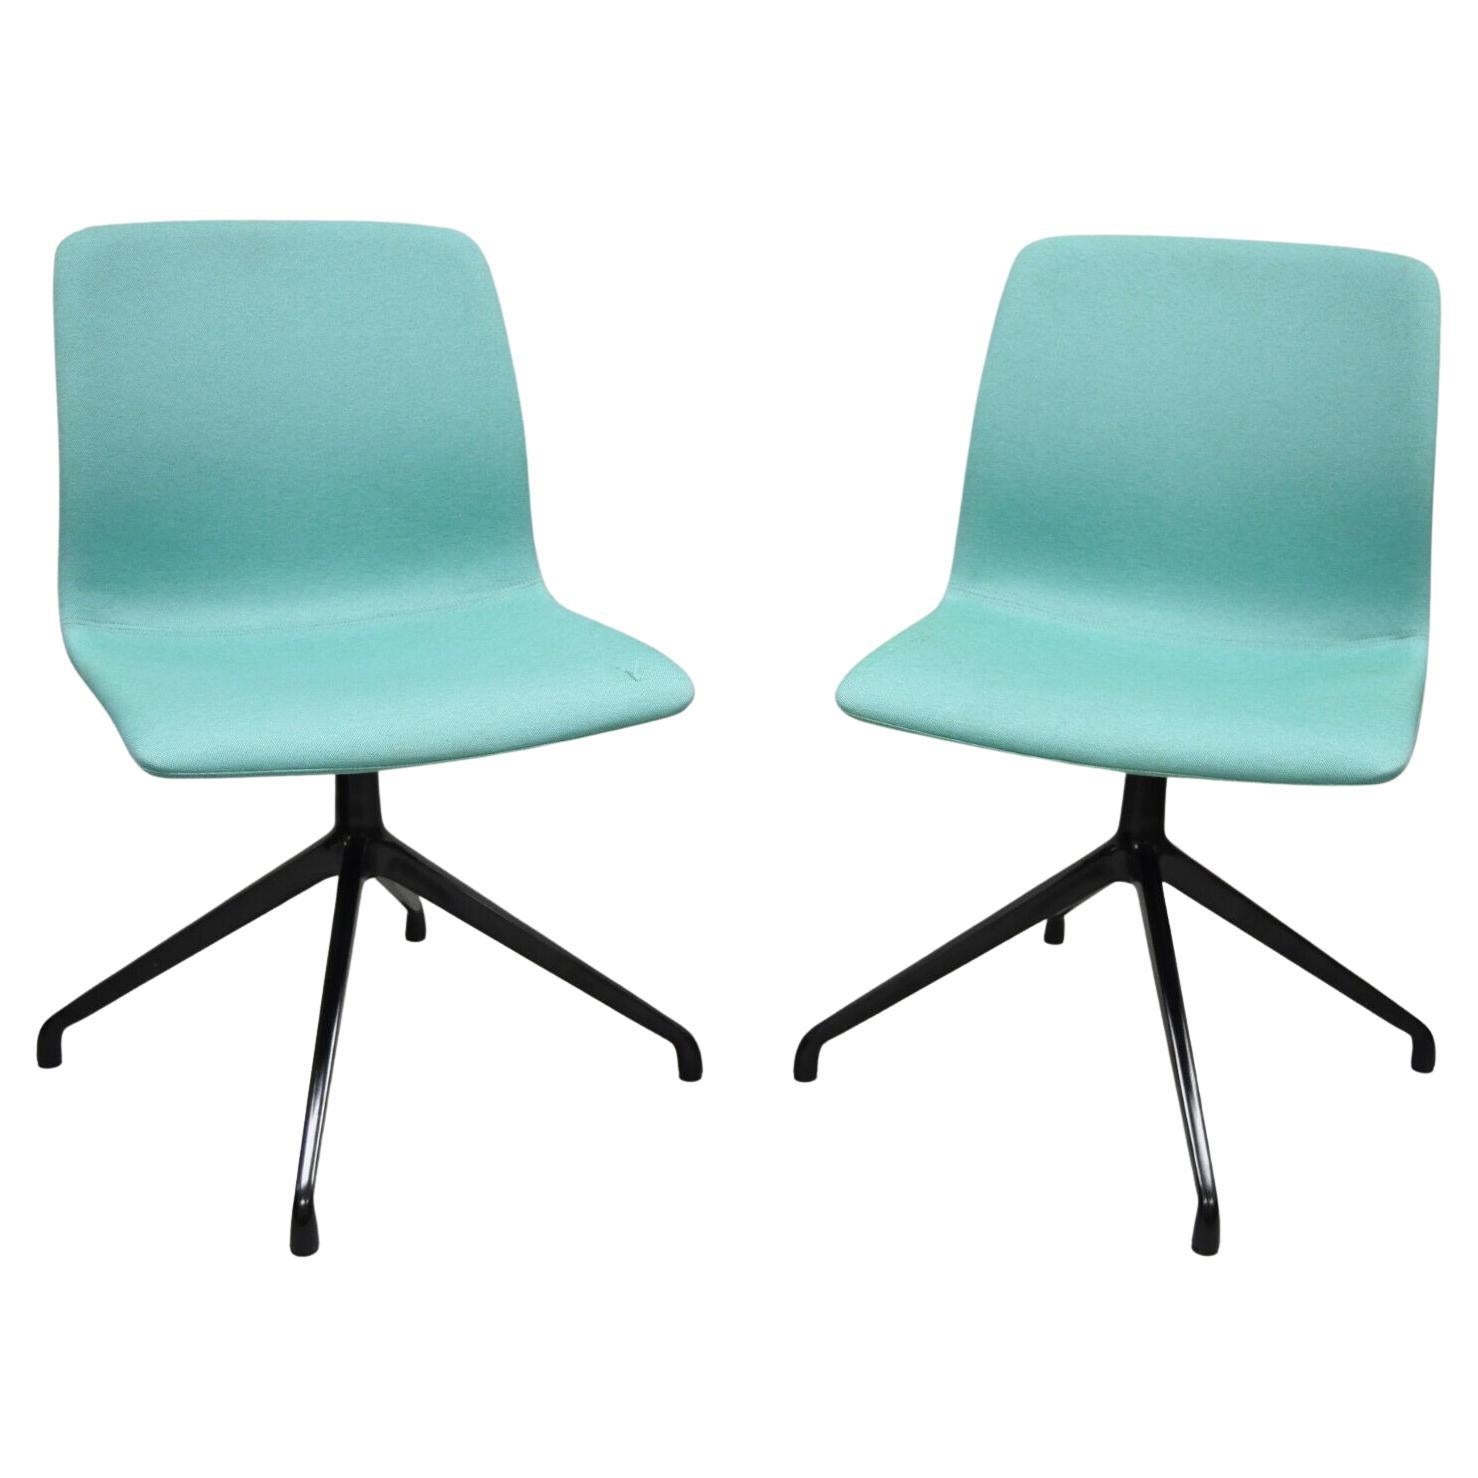 ODS Hairpin Swivel Base Blue Upholstered Side Chair, a Pair For Sale